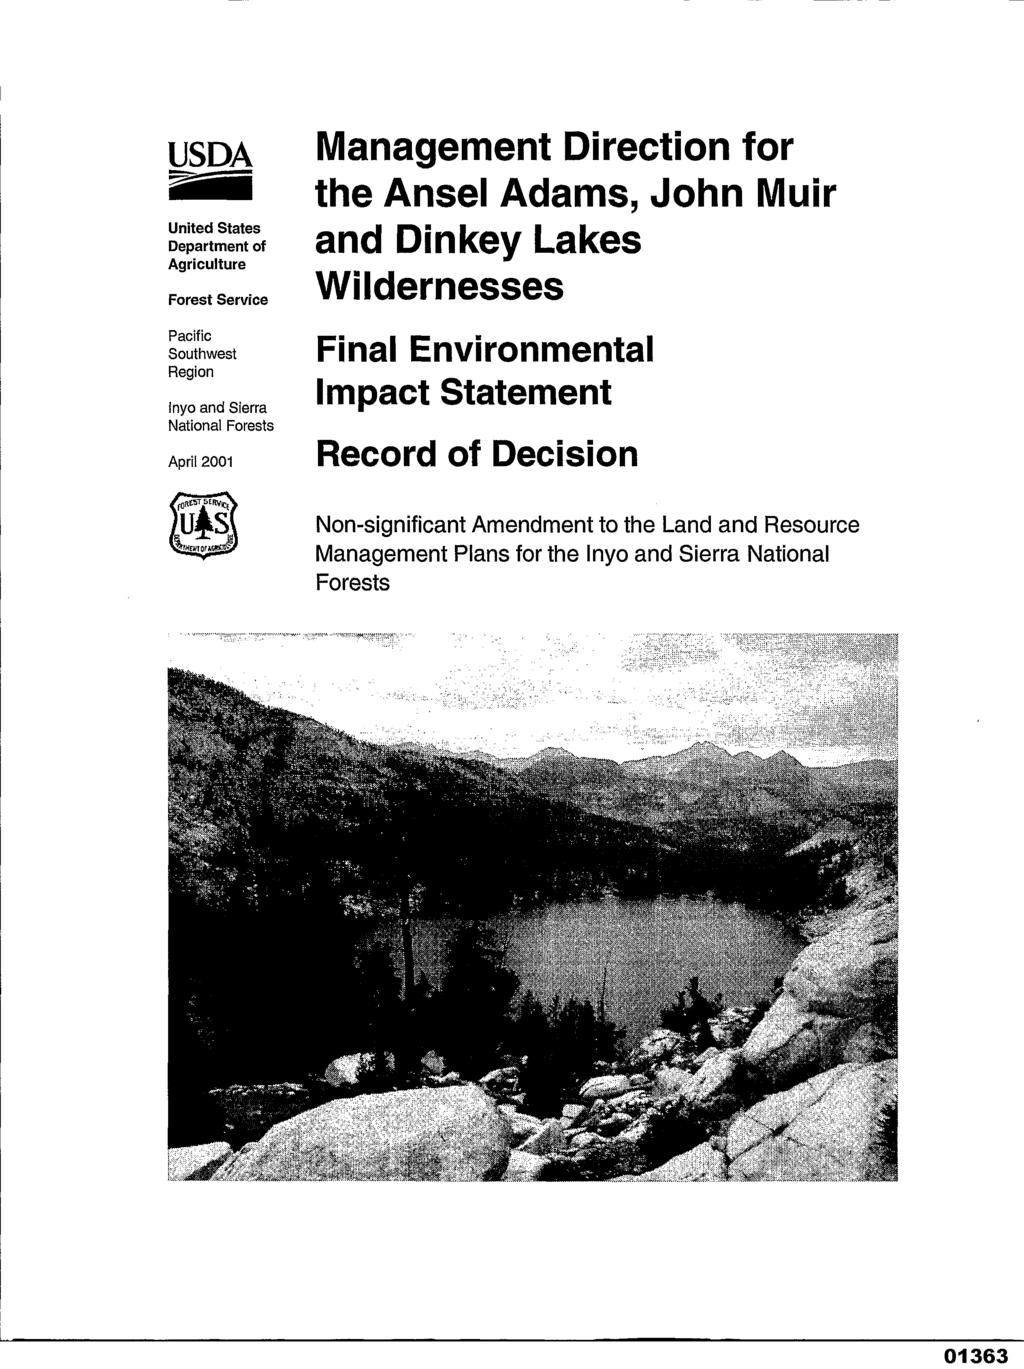 USDA United States Department of Agriculture Forest Service Management Direction for the Ansel Adams John Muir and Dinkey Lakes Wildernesses Pacific Southwest Region lnyo and Sierra